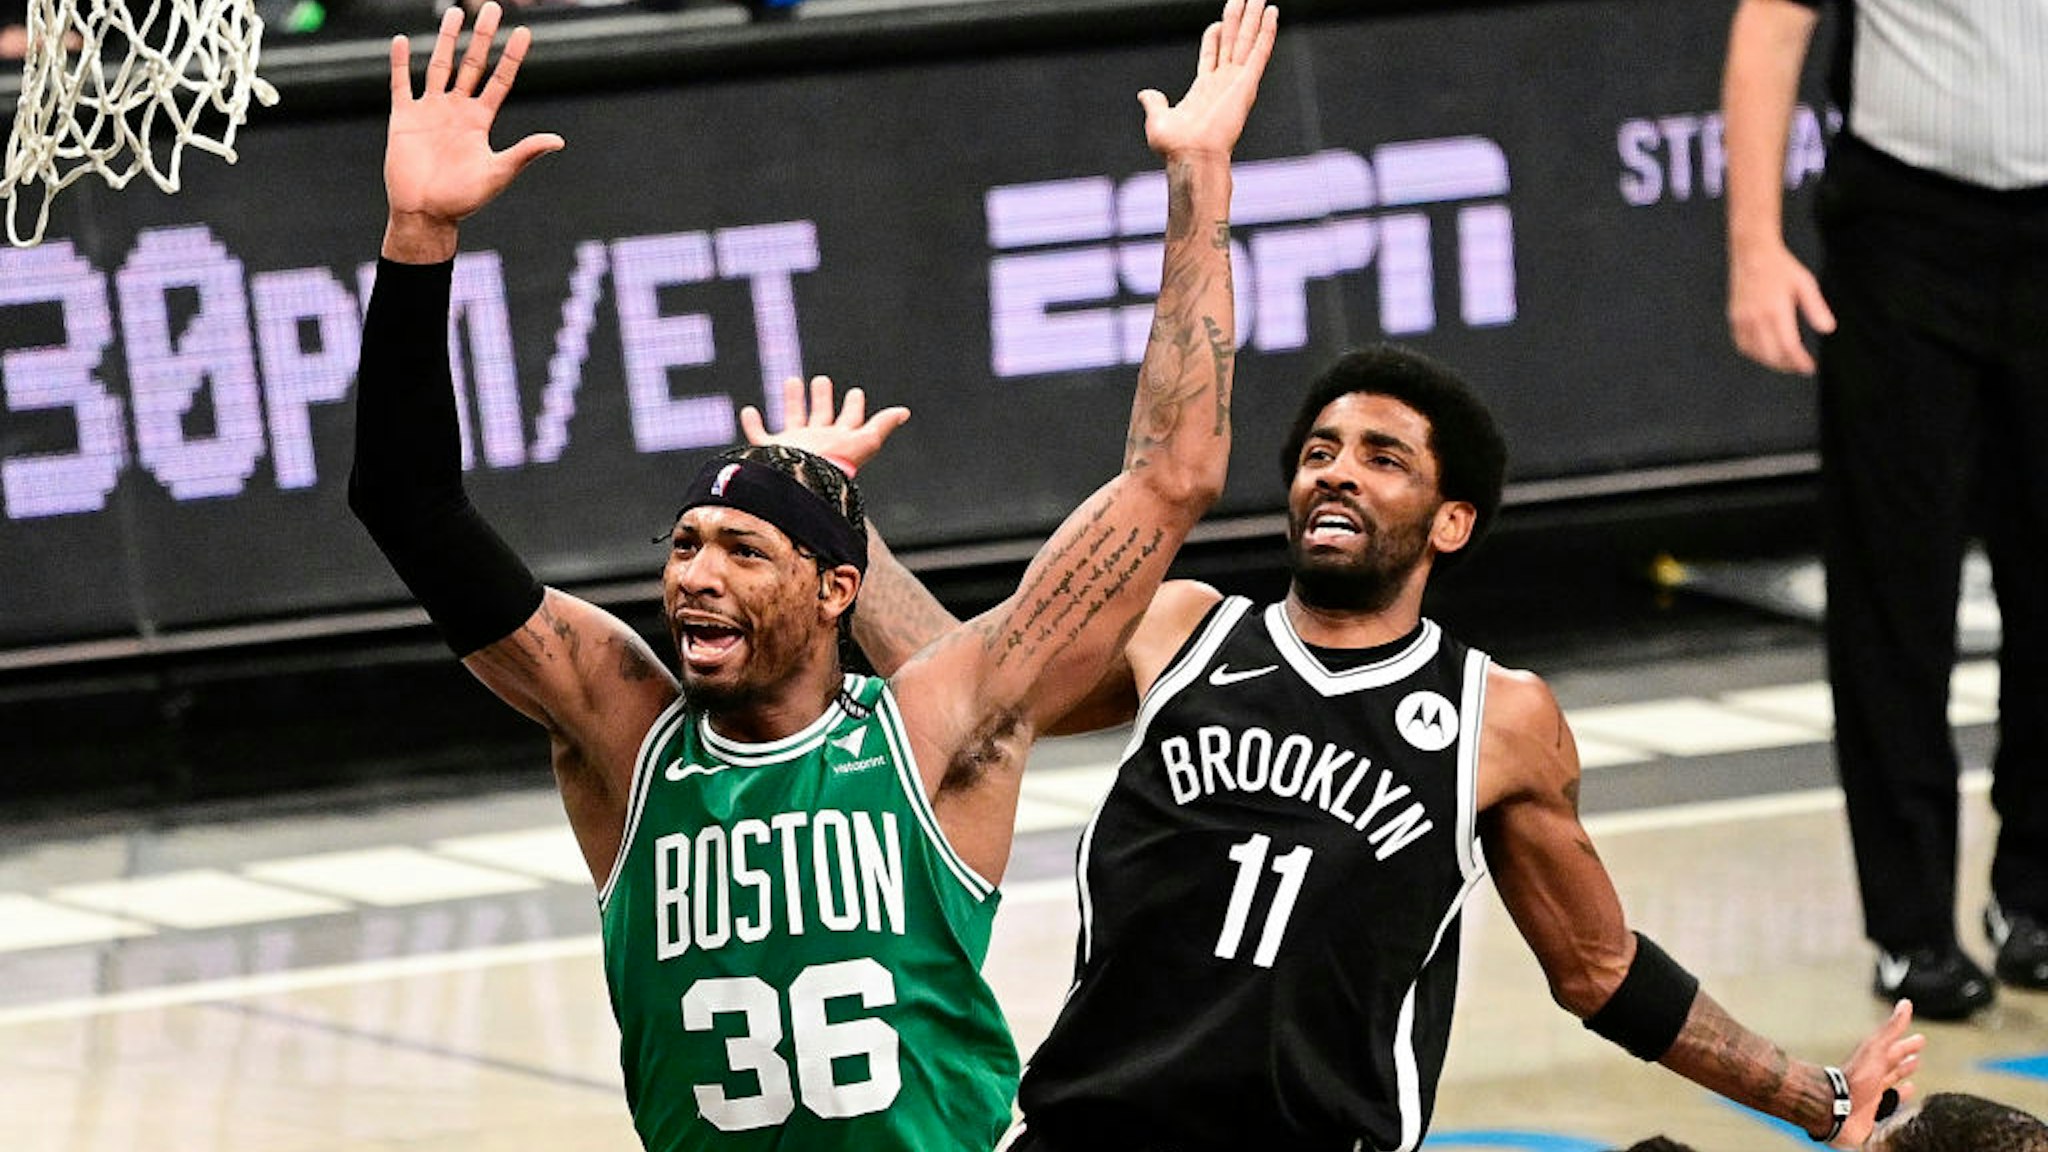 NEW YORK, NEW YORK - MAY 22: Marcus Smart #36 of the Boston Celtics is fouled by Kyrie Irving #11 of the Brooklyn Nets in Game One of the First Round of the 2021 NBA Playoffs at Barclays Center at Barclays Center on May 22, 2021 in New York City. NOTE TO USER: User expressly acknowledges and agrees that, by downloading and or using this photograph, User is consenting to the terms and conditions of the Getty Images License Agreement. (Photo by Steven Ryan/Getty Images)